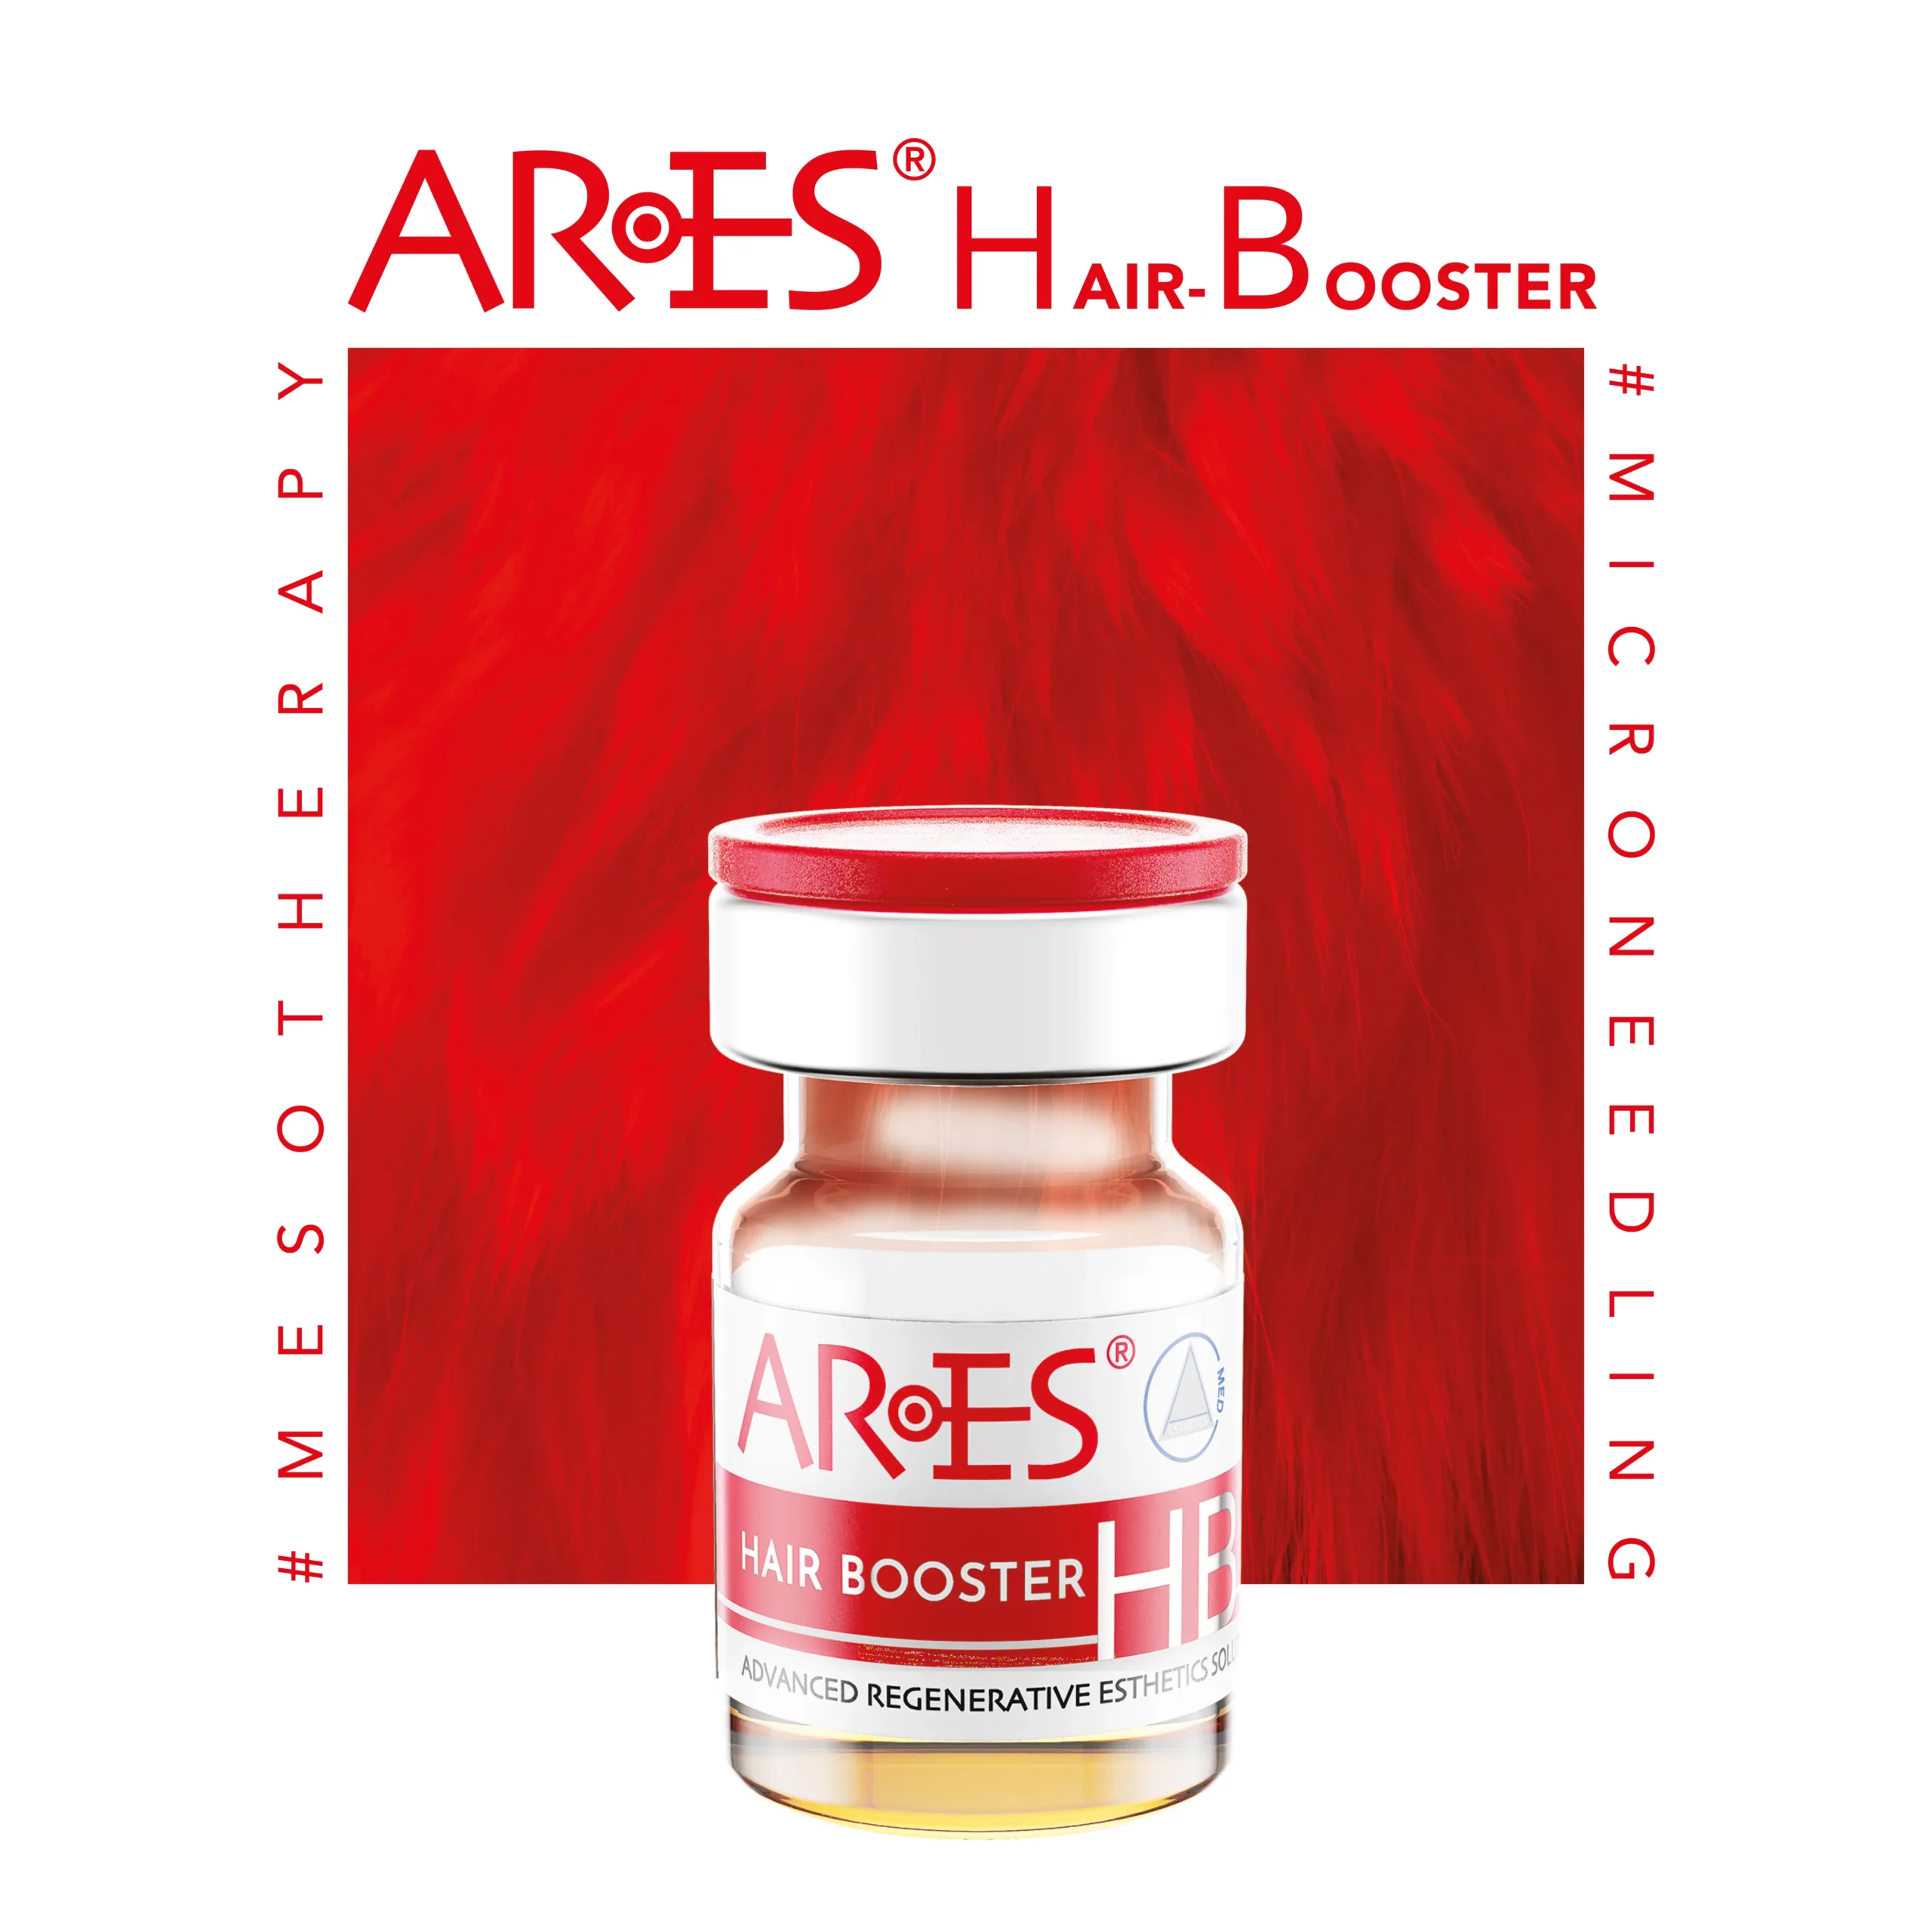 Ares-Hb